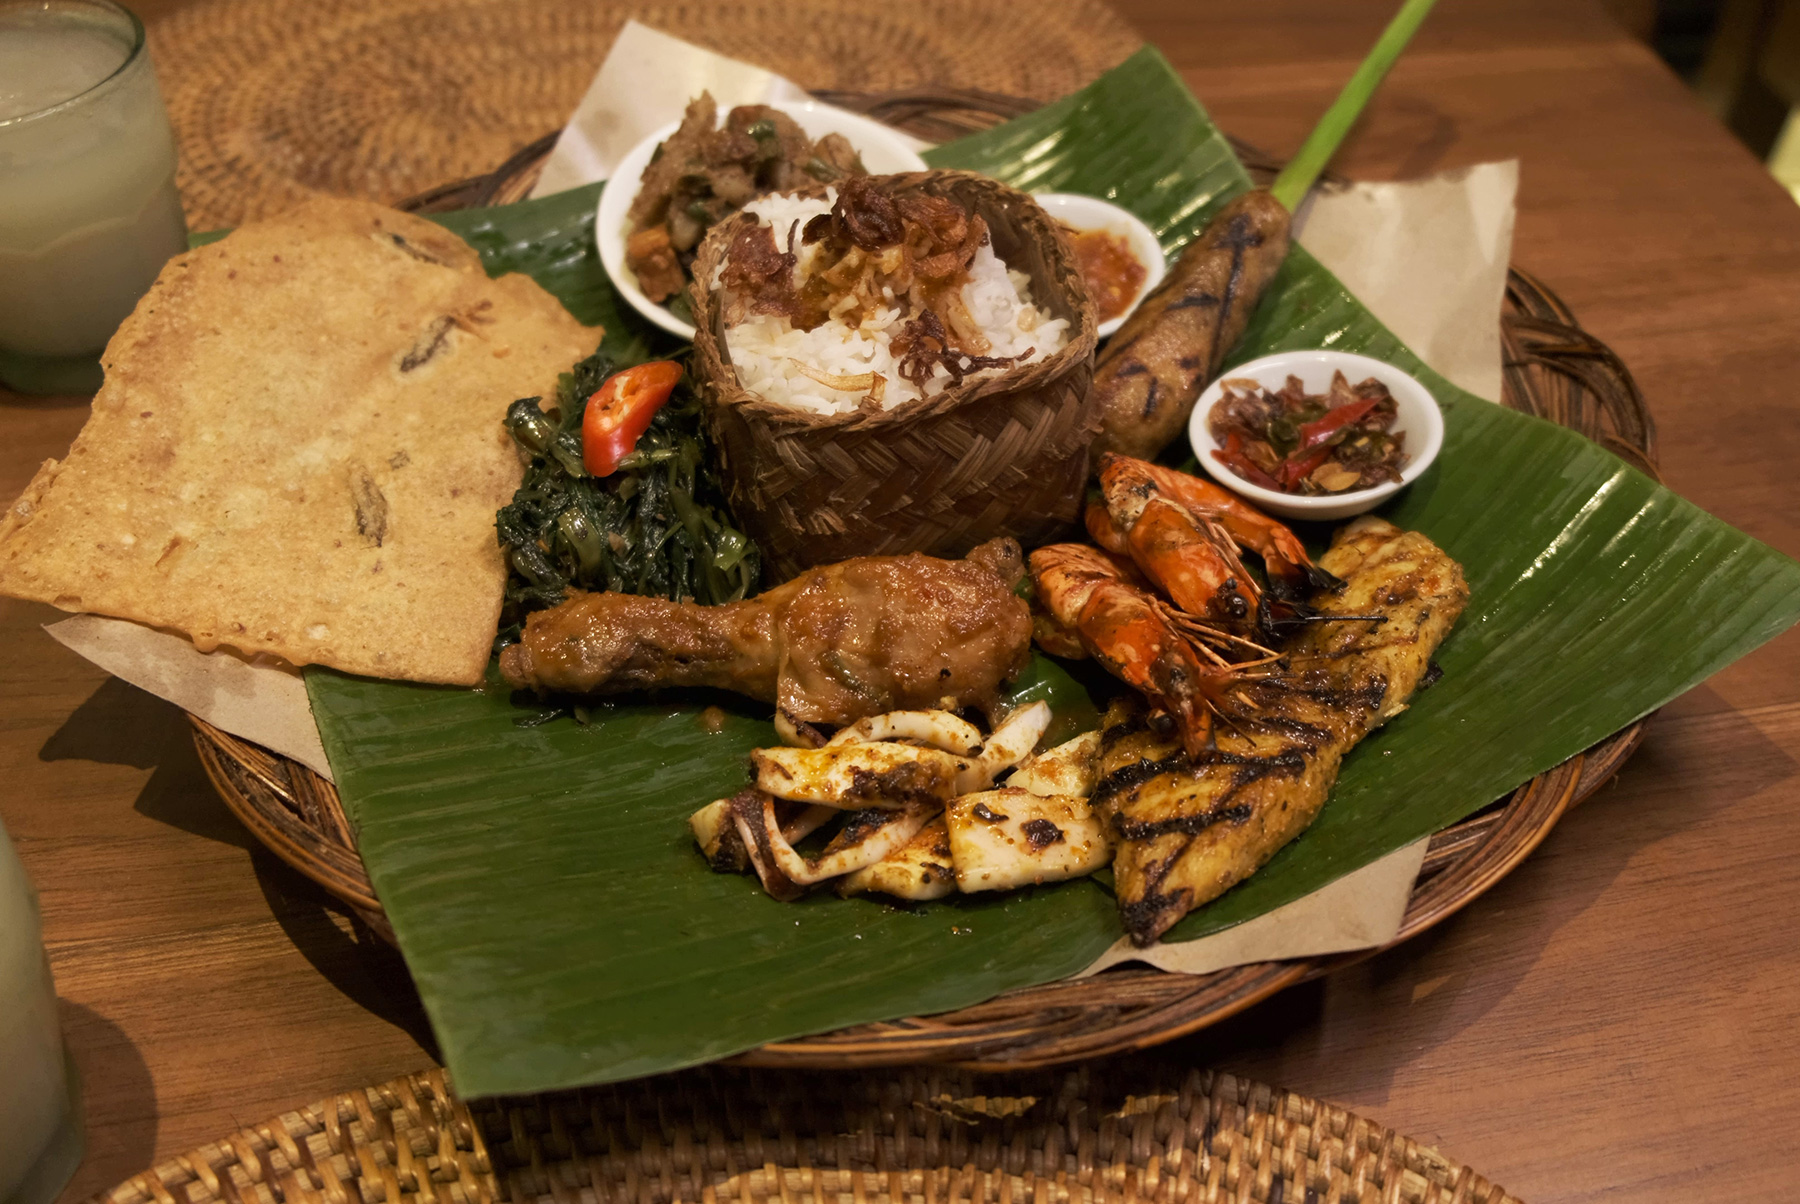 Rush right over to Ole-Ole Bali and order their drool-worthy Nasi Campur!